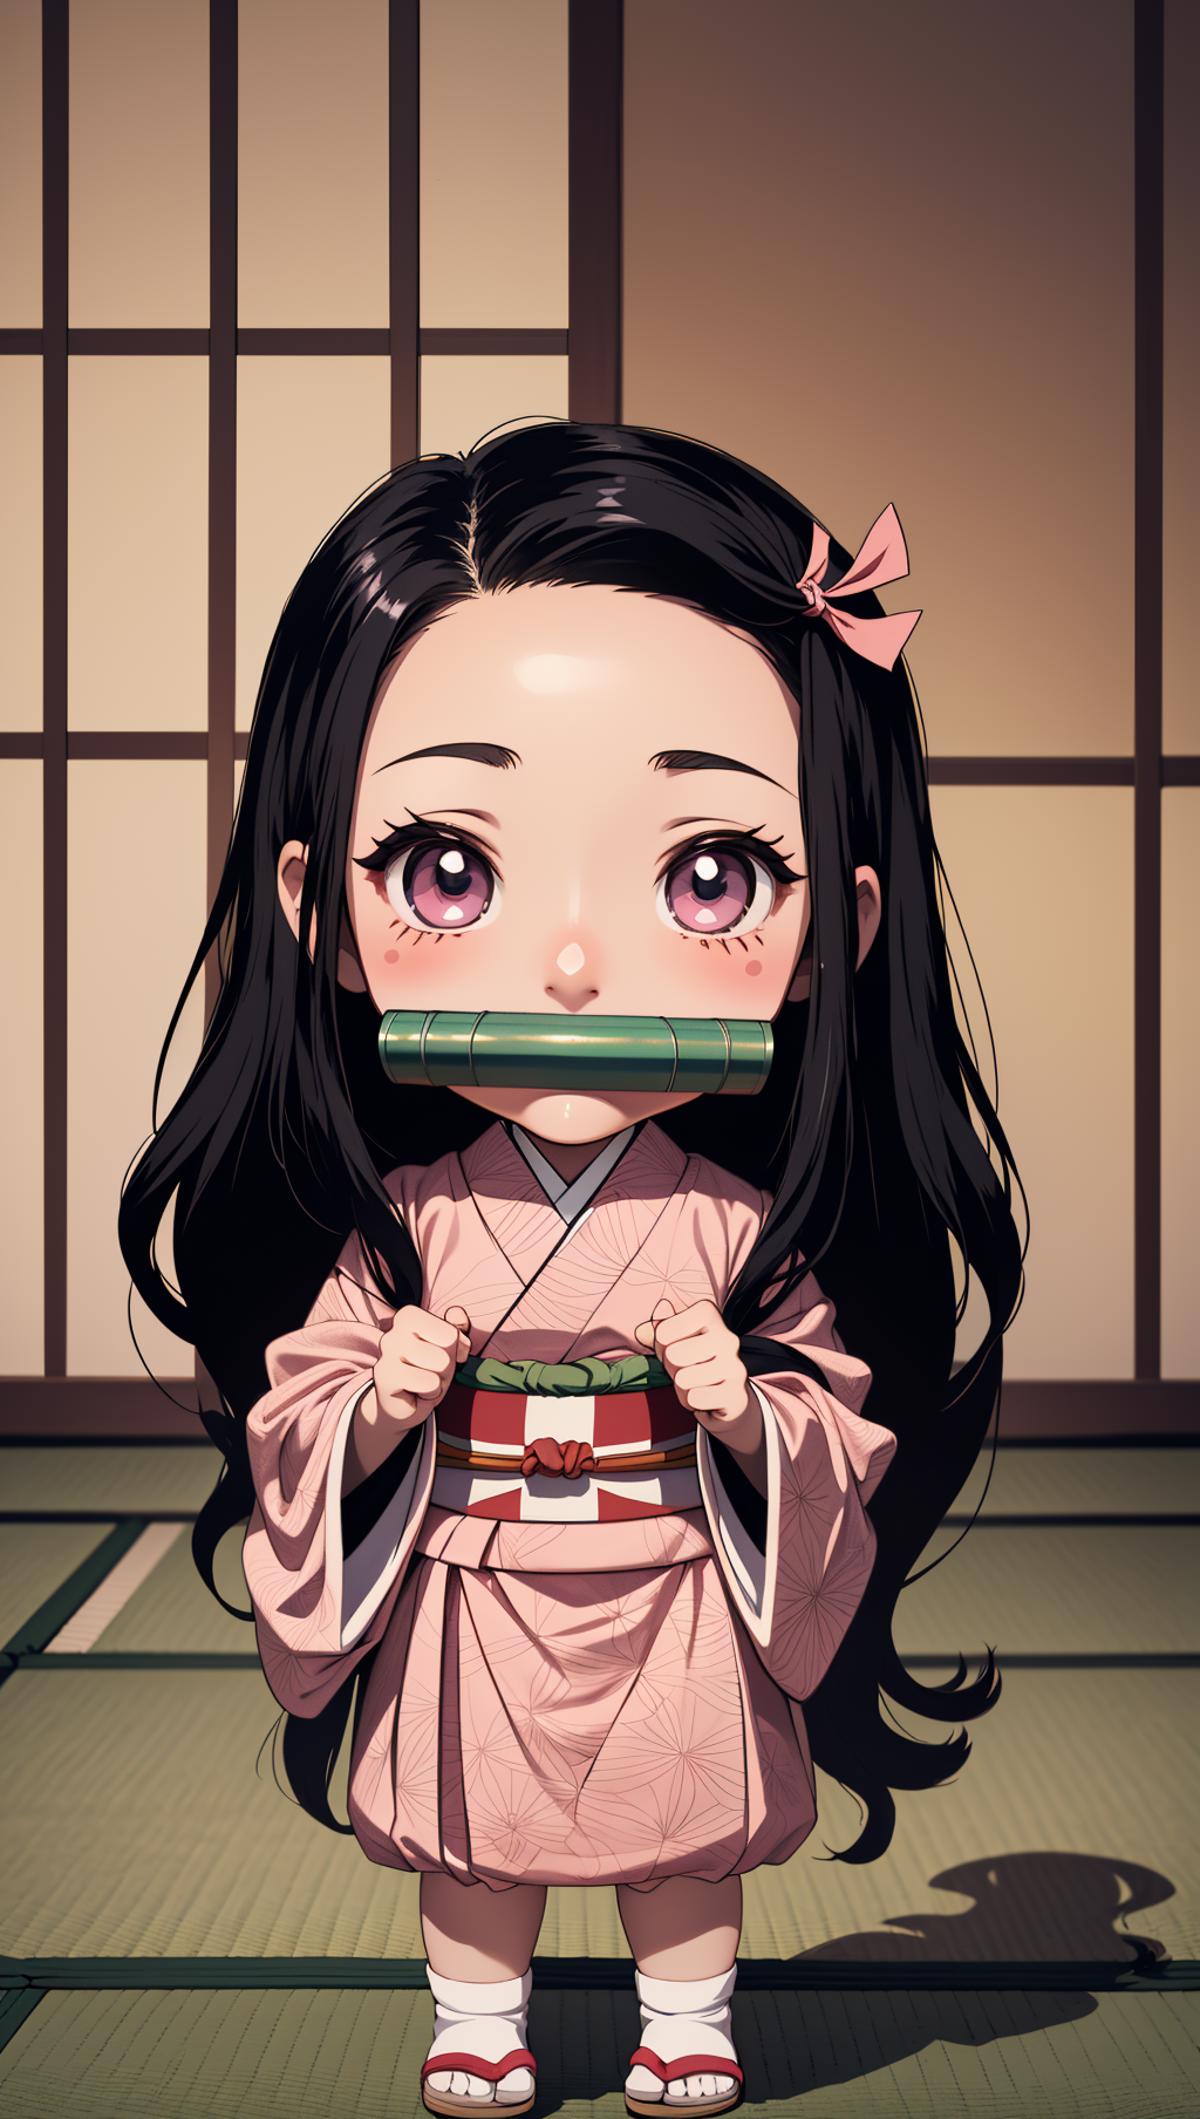 A young girl in a pink kimono holding a green book.